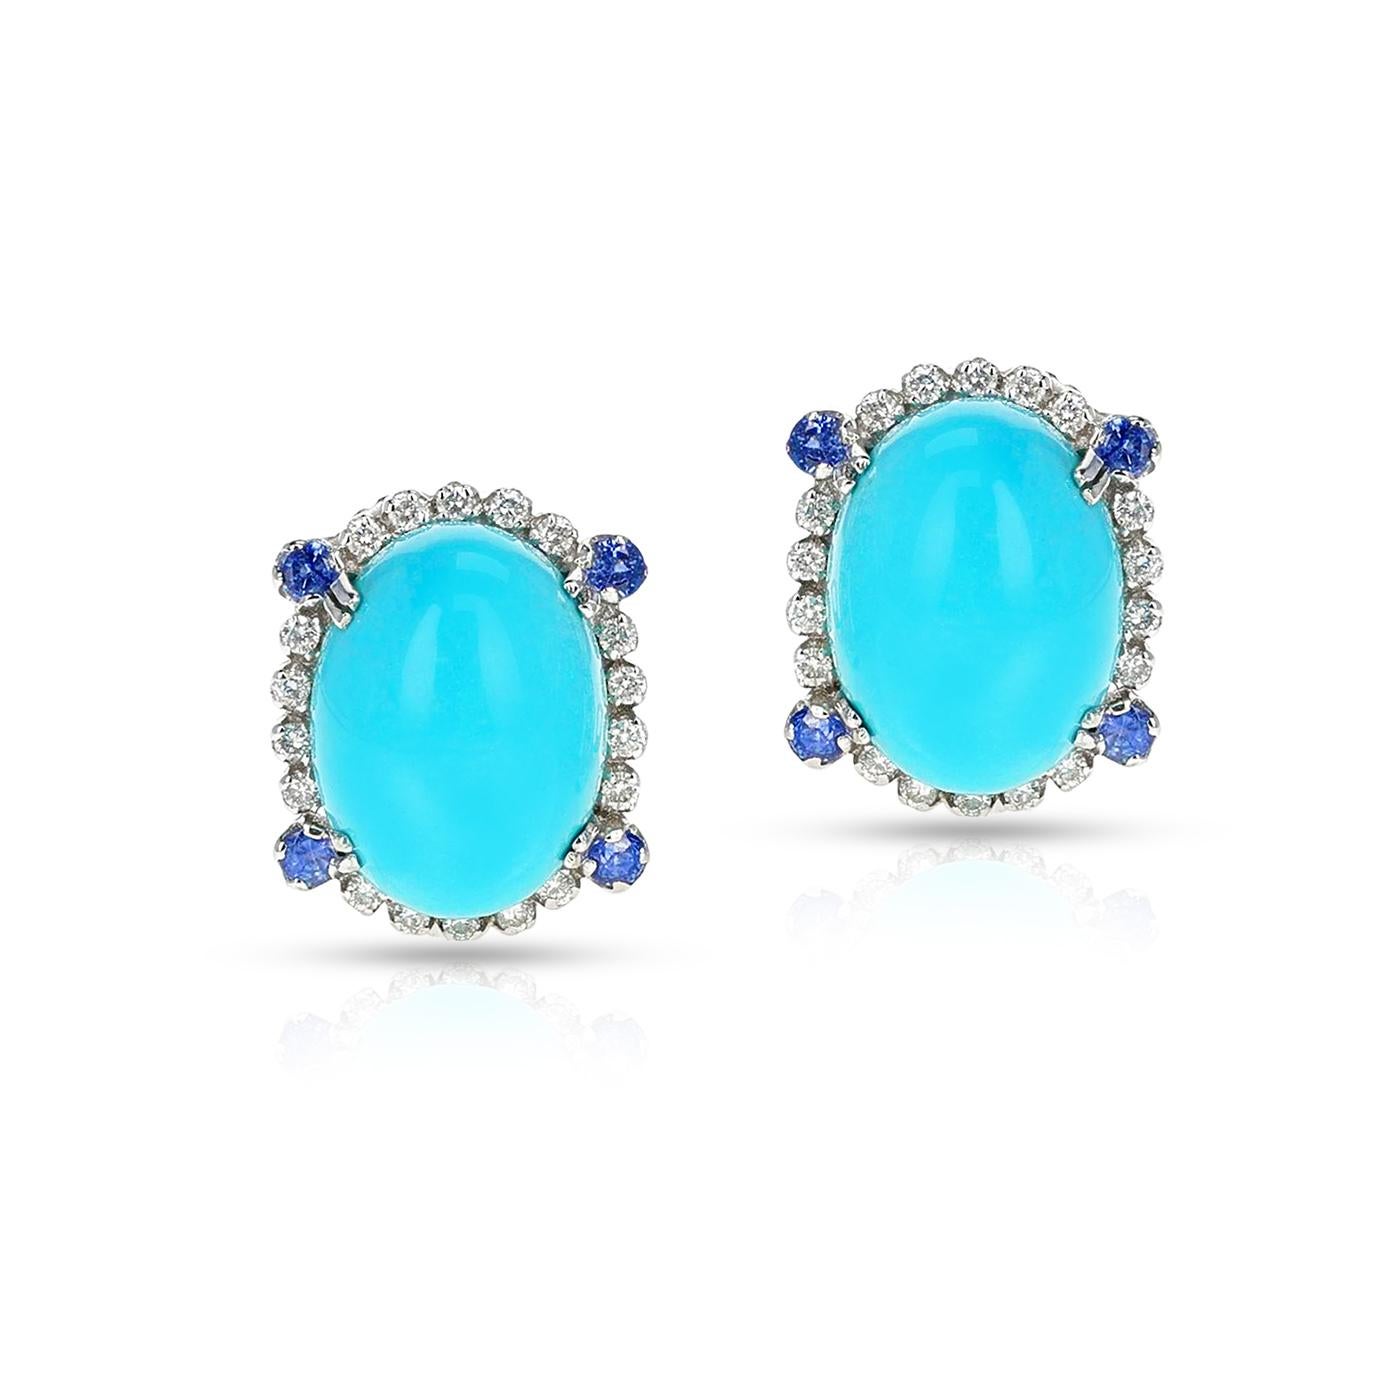 Turquoise Oval Cabochon Earrings with Diamonds and Sapphire, 18k For Sale 1